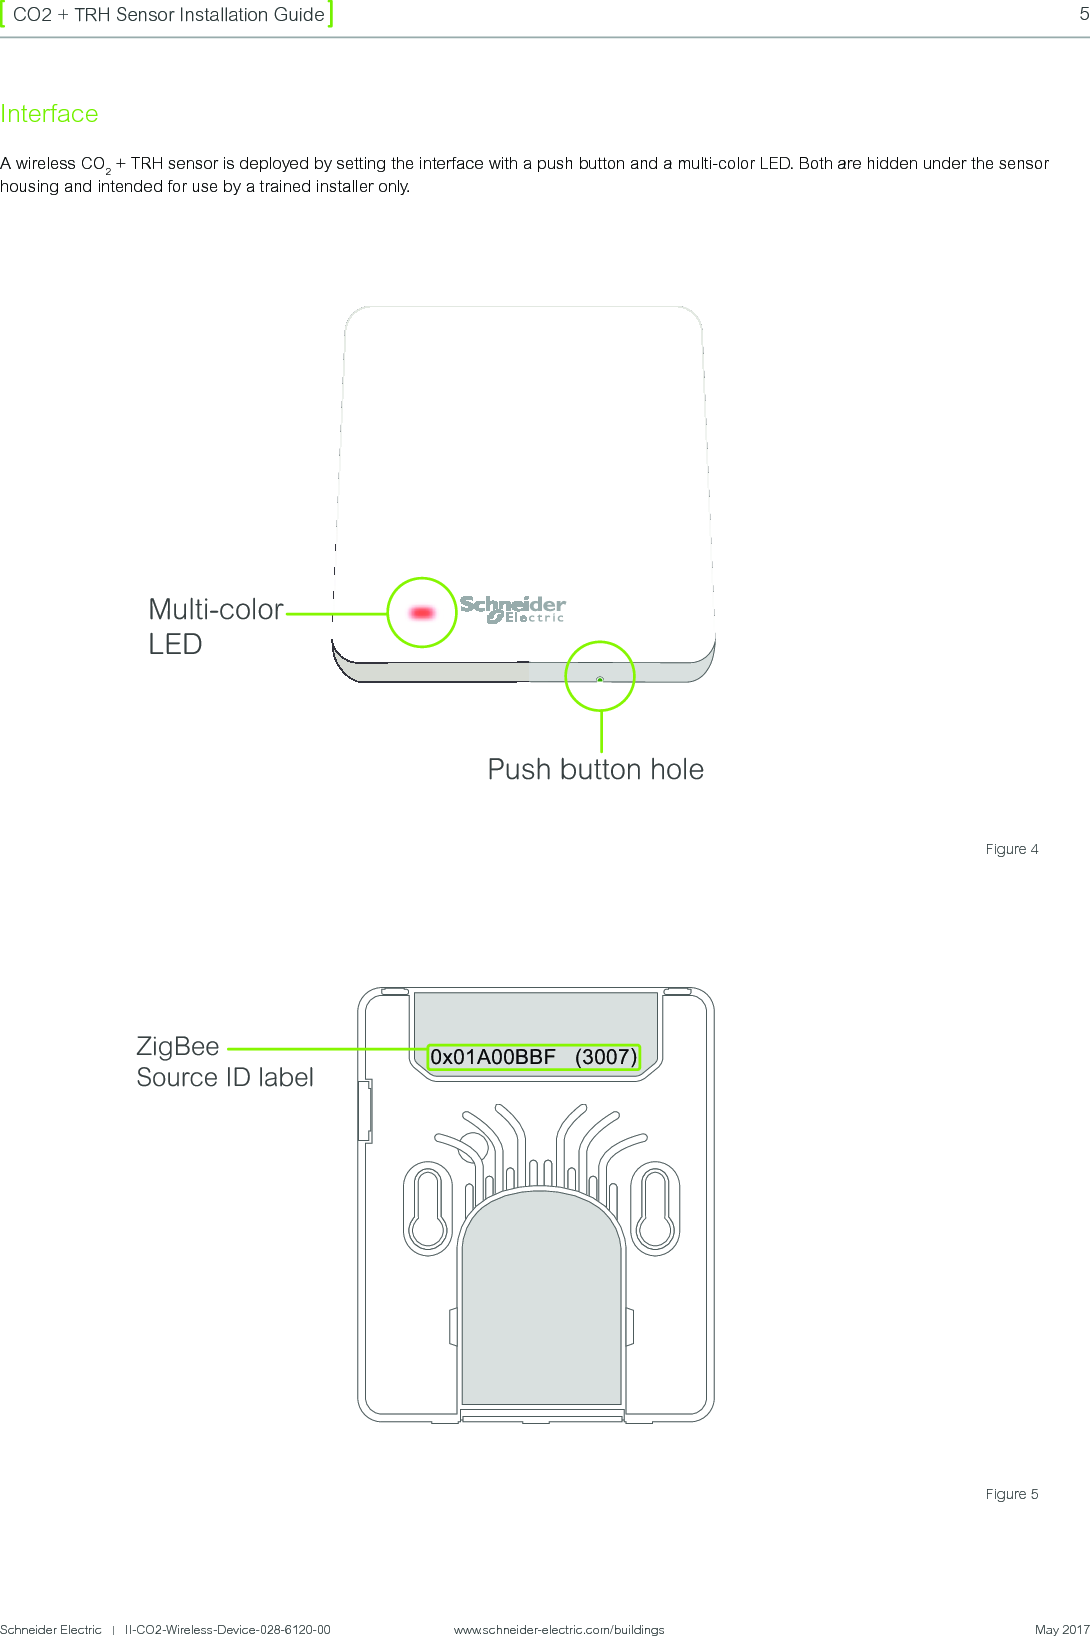 Schneider Electric   |   II-CO2-Wireless-Device-028-6120-00                    www.schneider-electric.com/buildings  May 20175CO2 + TRH Sensor Installation GuideInterfaceA wireless CO2 + TRH sensor is deployed by setting the interface with a push button and a multi-color LED. Both are hidden under the sensor housing and intended for use by a trained installer only.Multi-colorLEDPush button holeZigBee Source ID label0x01A00BBF   (3007)Figure 4Figure 5